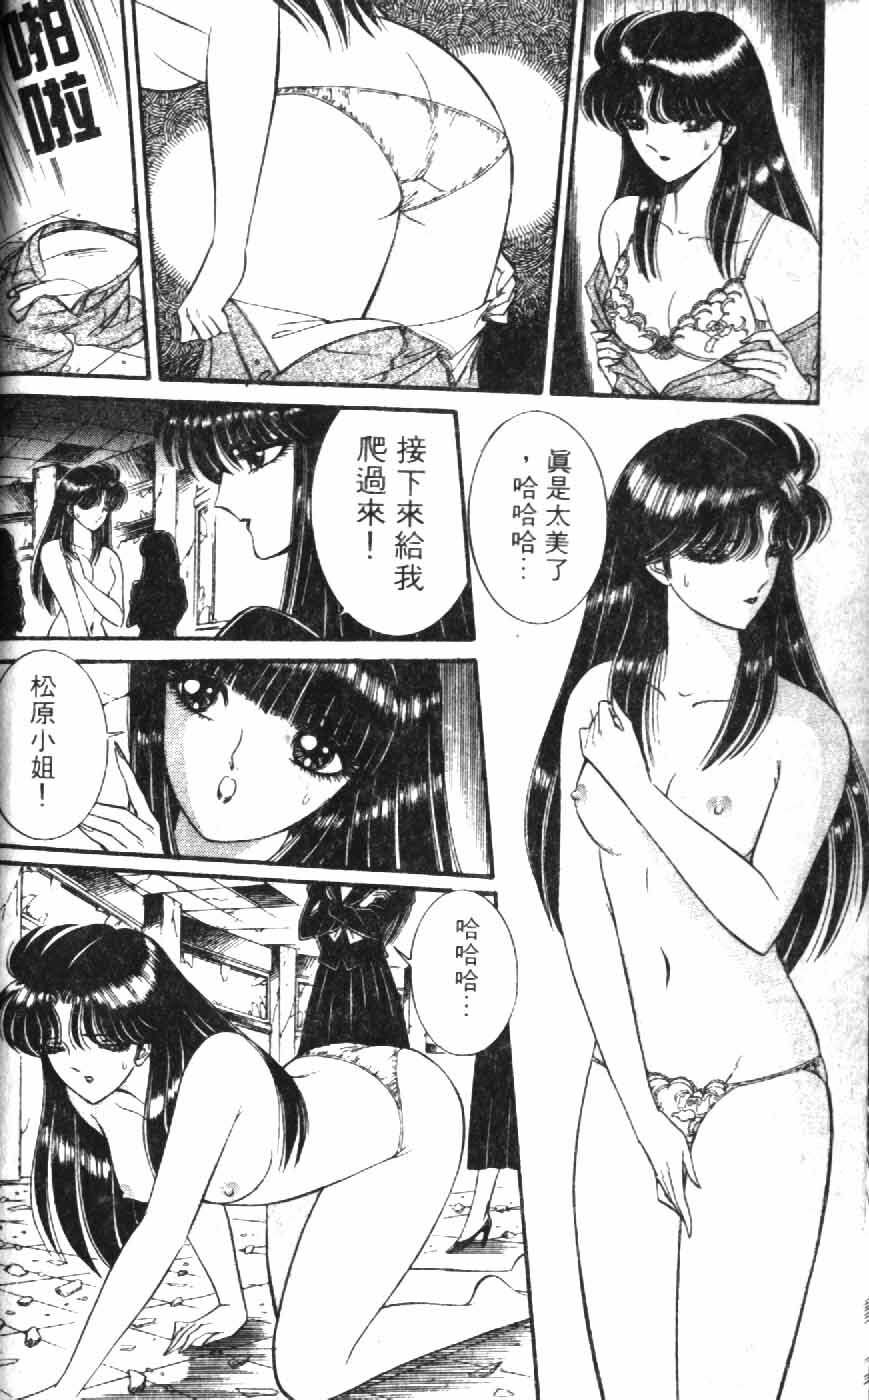 [Senno Knife] Ouma ga Horror Show 1 - Trans Sexual Special Show 1 | 顫慄博覽會 1 [Chinese] page 32 full